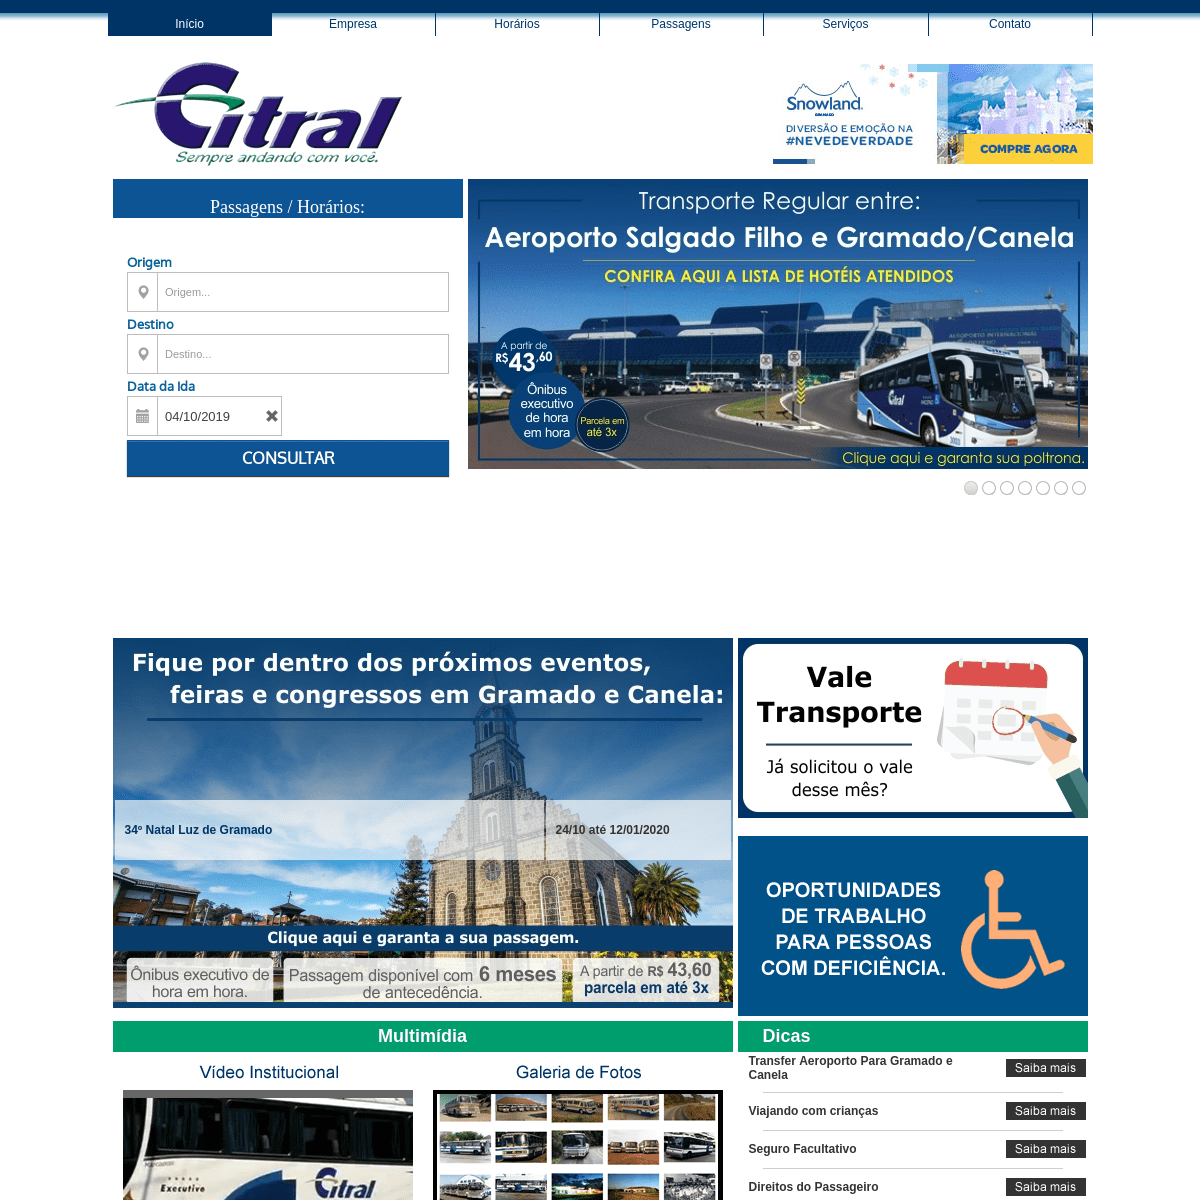 Citral S/A